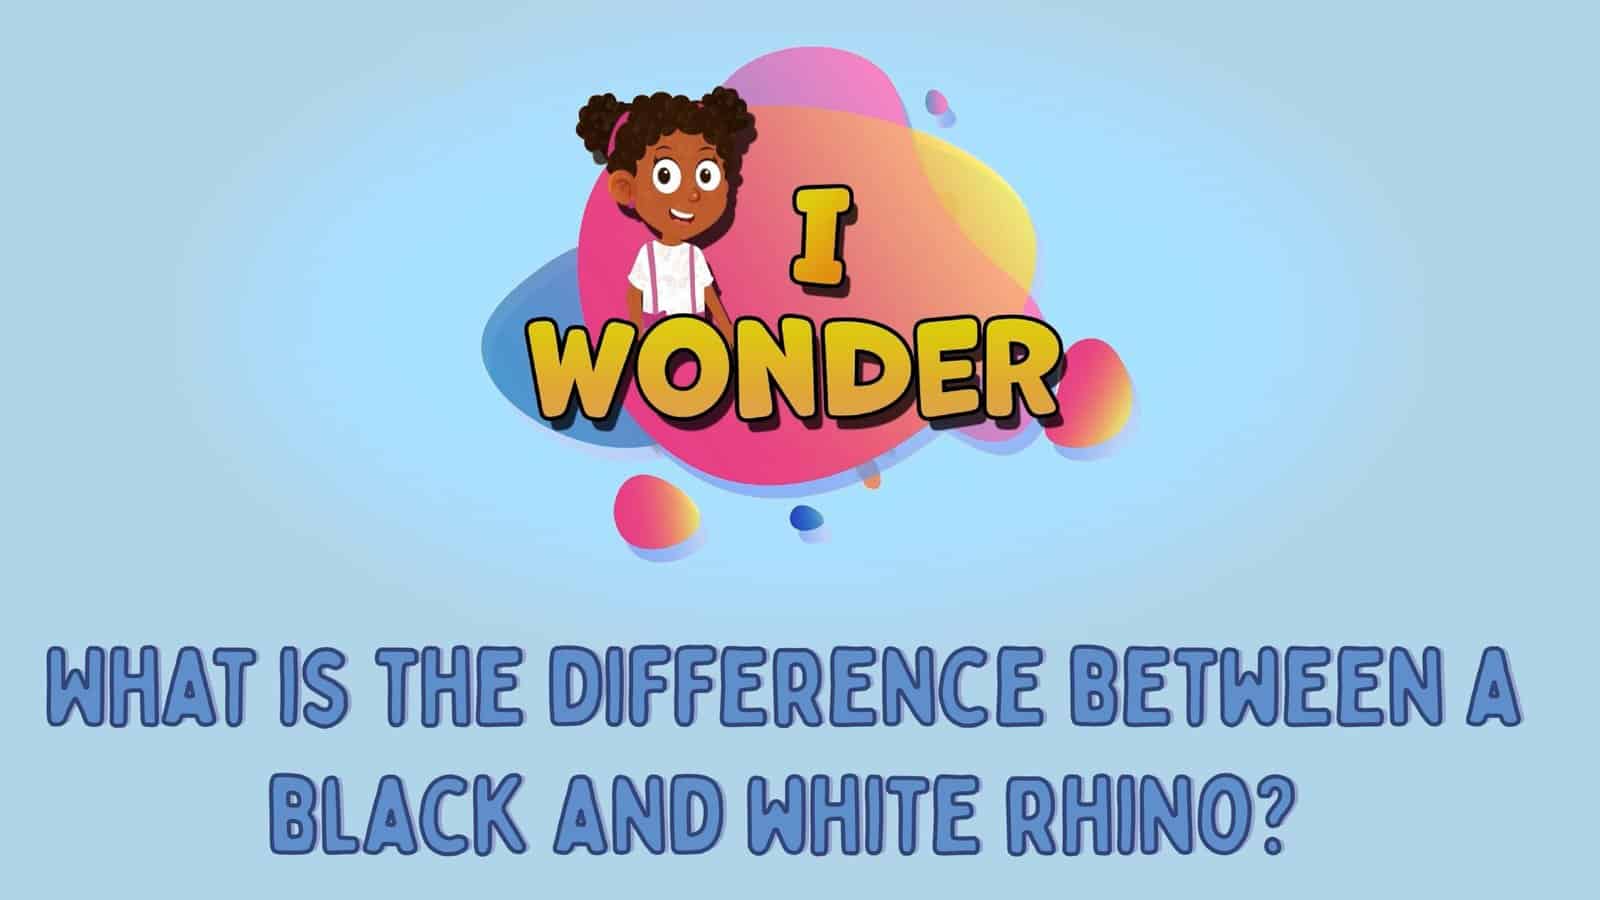 What Is The Difference Between Black And White Rhino?